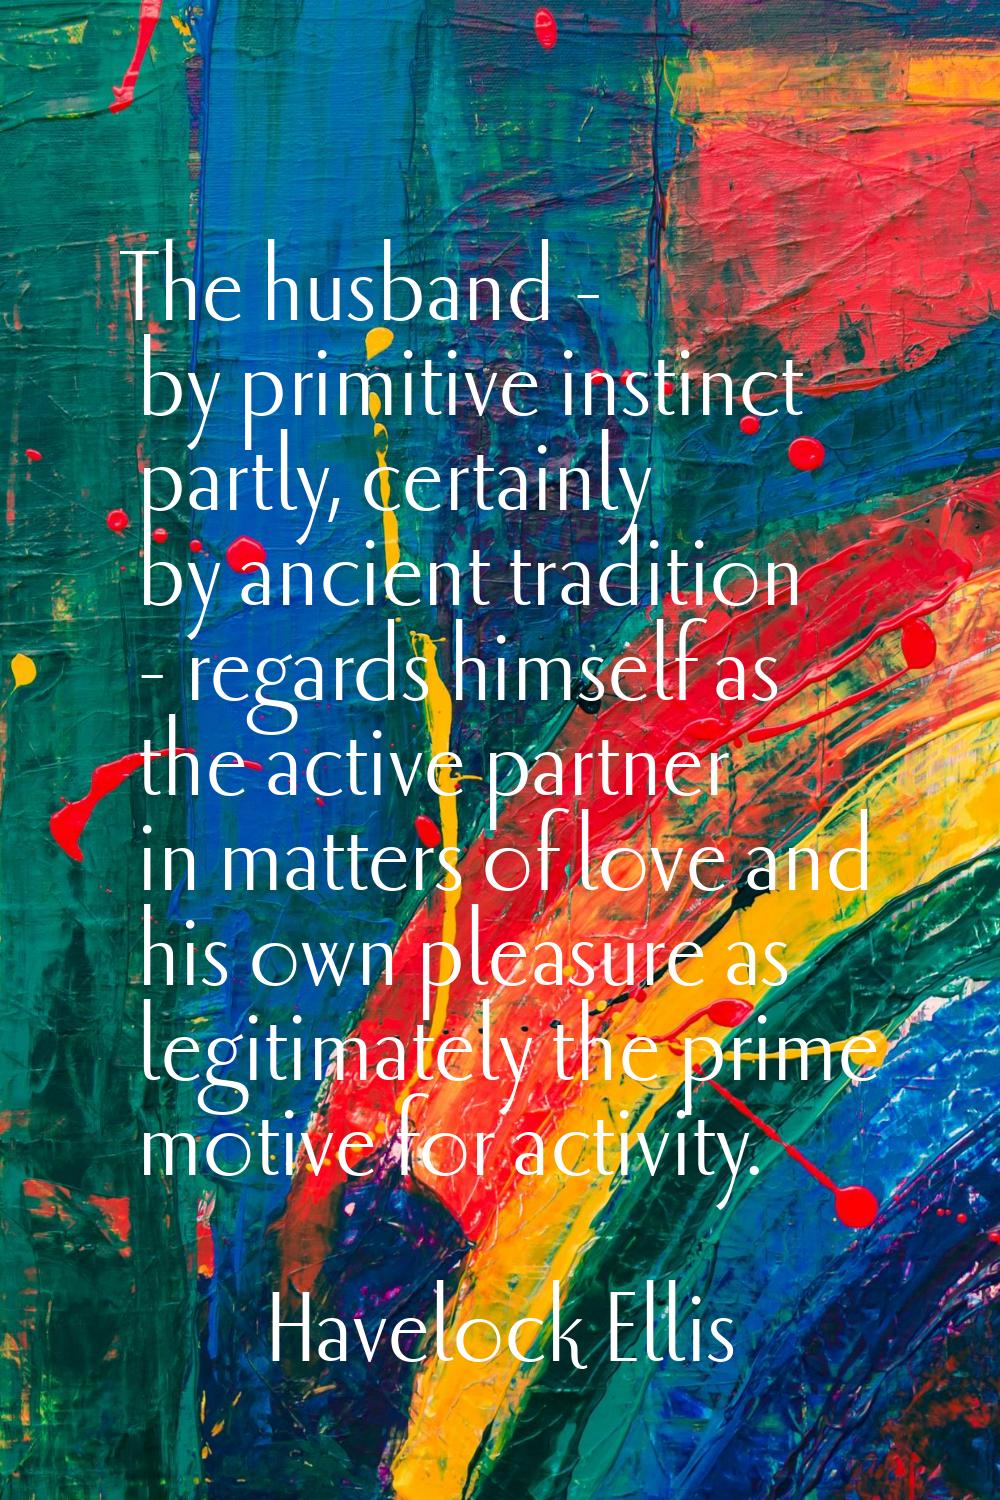 The husband - by primitive instinct partly, certainly by ancient tradition - regards himself as the